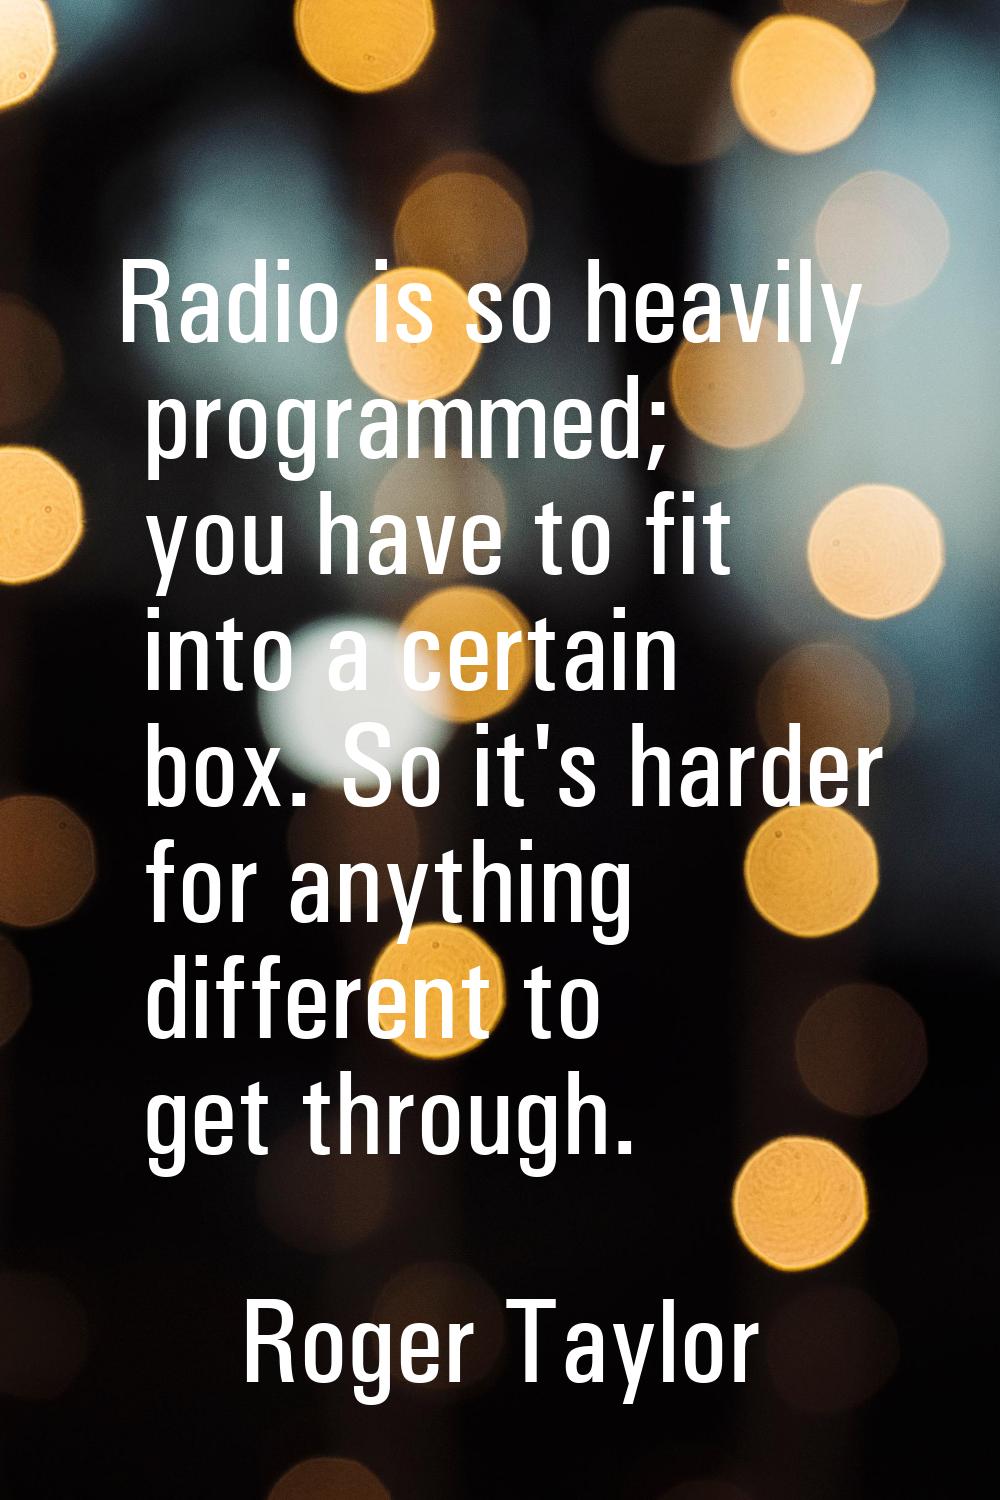 Radio is so heavily programmed; you have to fit into a certain box. So it's harder for anything dif